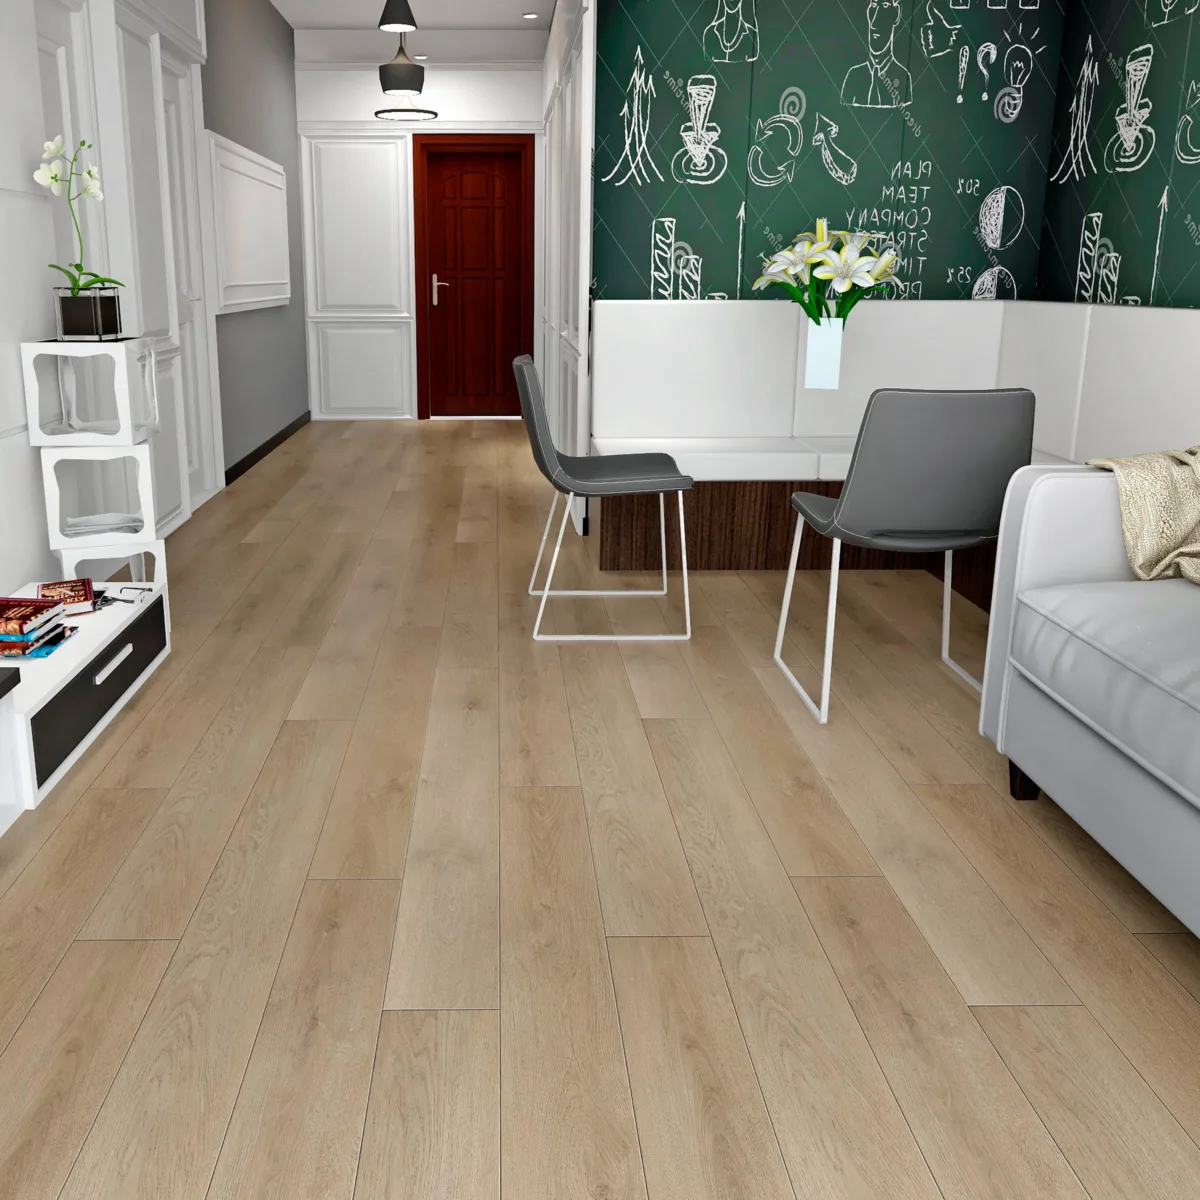 VALLEY-OAK Quick 48 Collection is a brand of luxury vinyl flooring that offers a variety of styles, colors